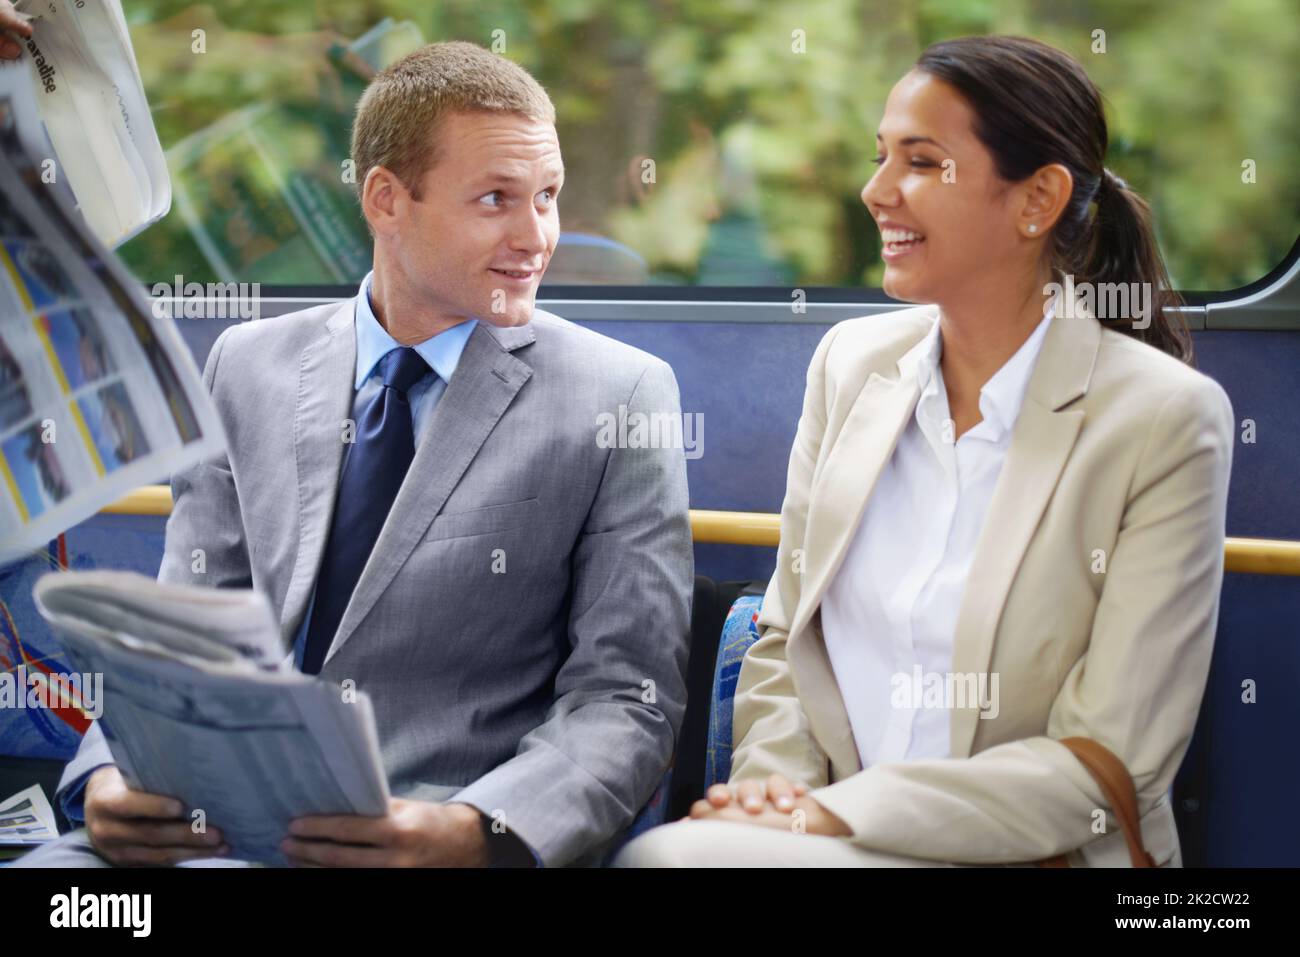 The daily commute. Shot of young business people commuting to work. Stock Photo